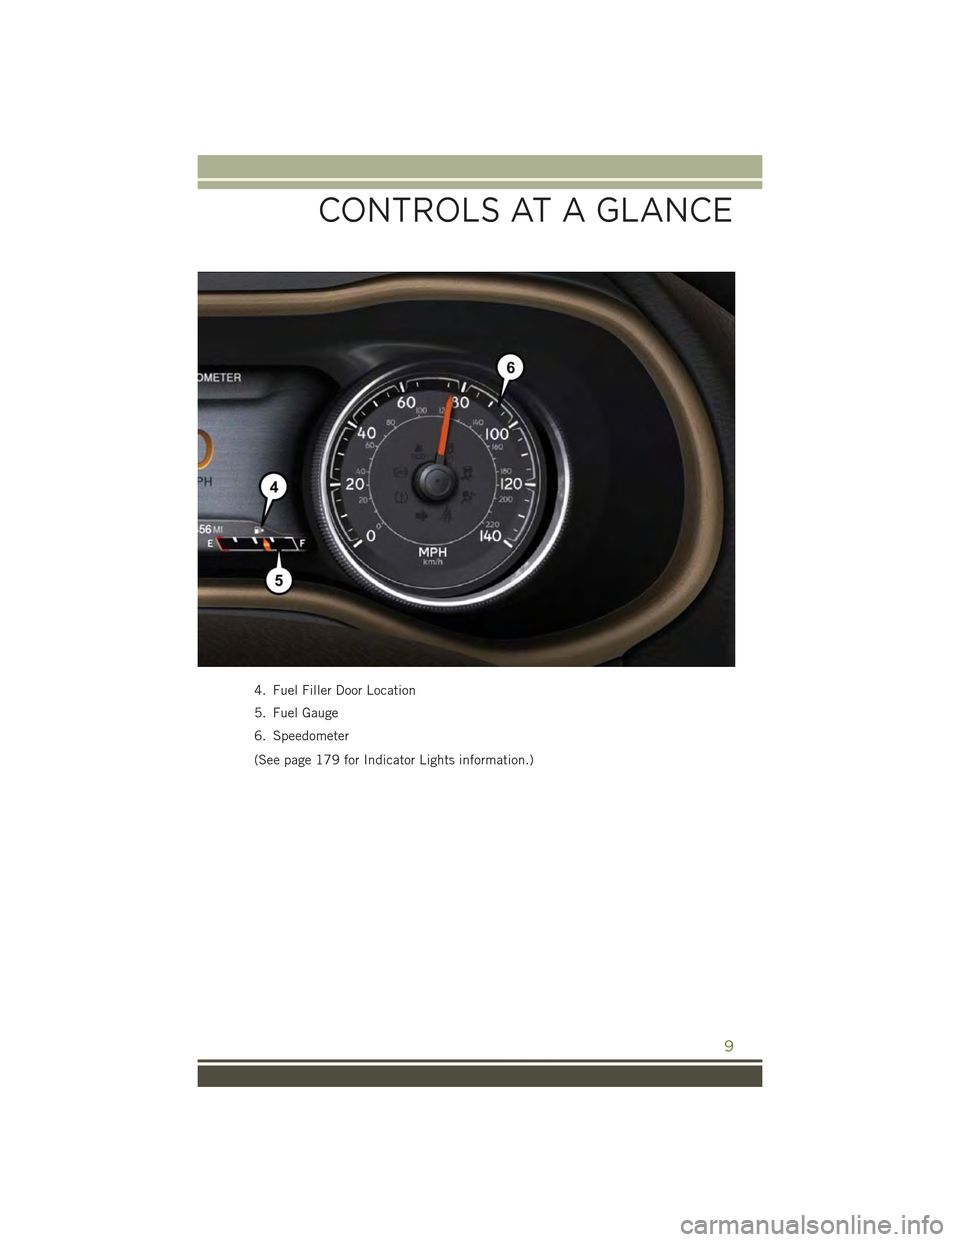 JEEP CHEROKEE 2015 KL / 5.G User Guide 4. Fuel Filler Door Location
5. Fuel Gauge
6. Speedometer
(See page 179 for Indicator Lights information.)
CONTROLS AT A GLANCE
9 